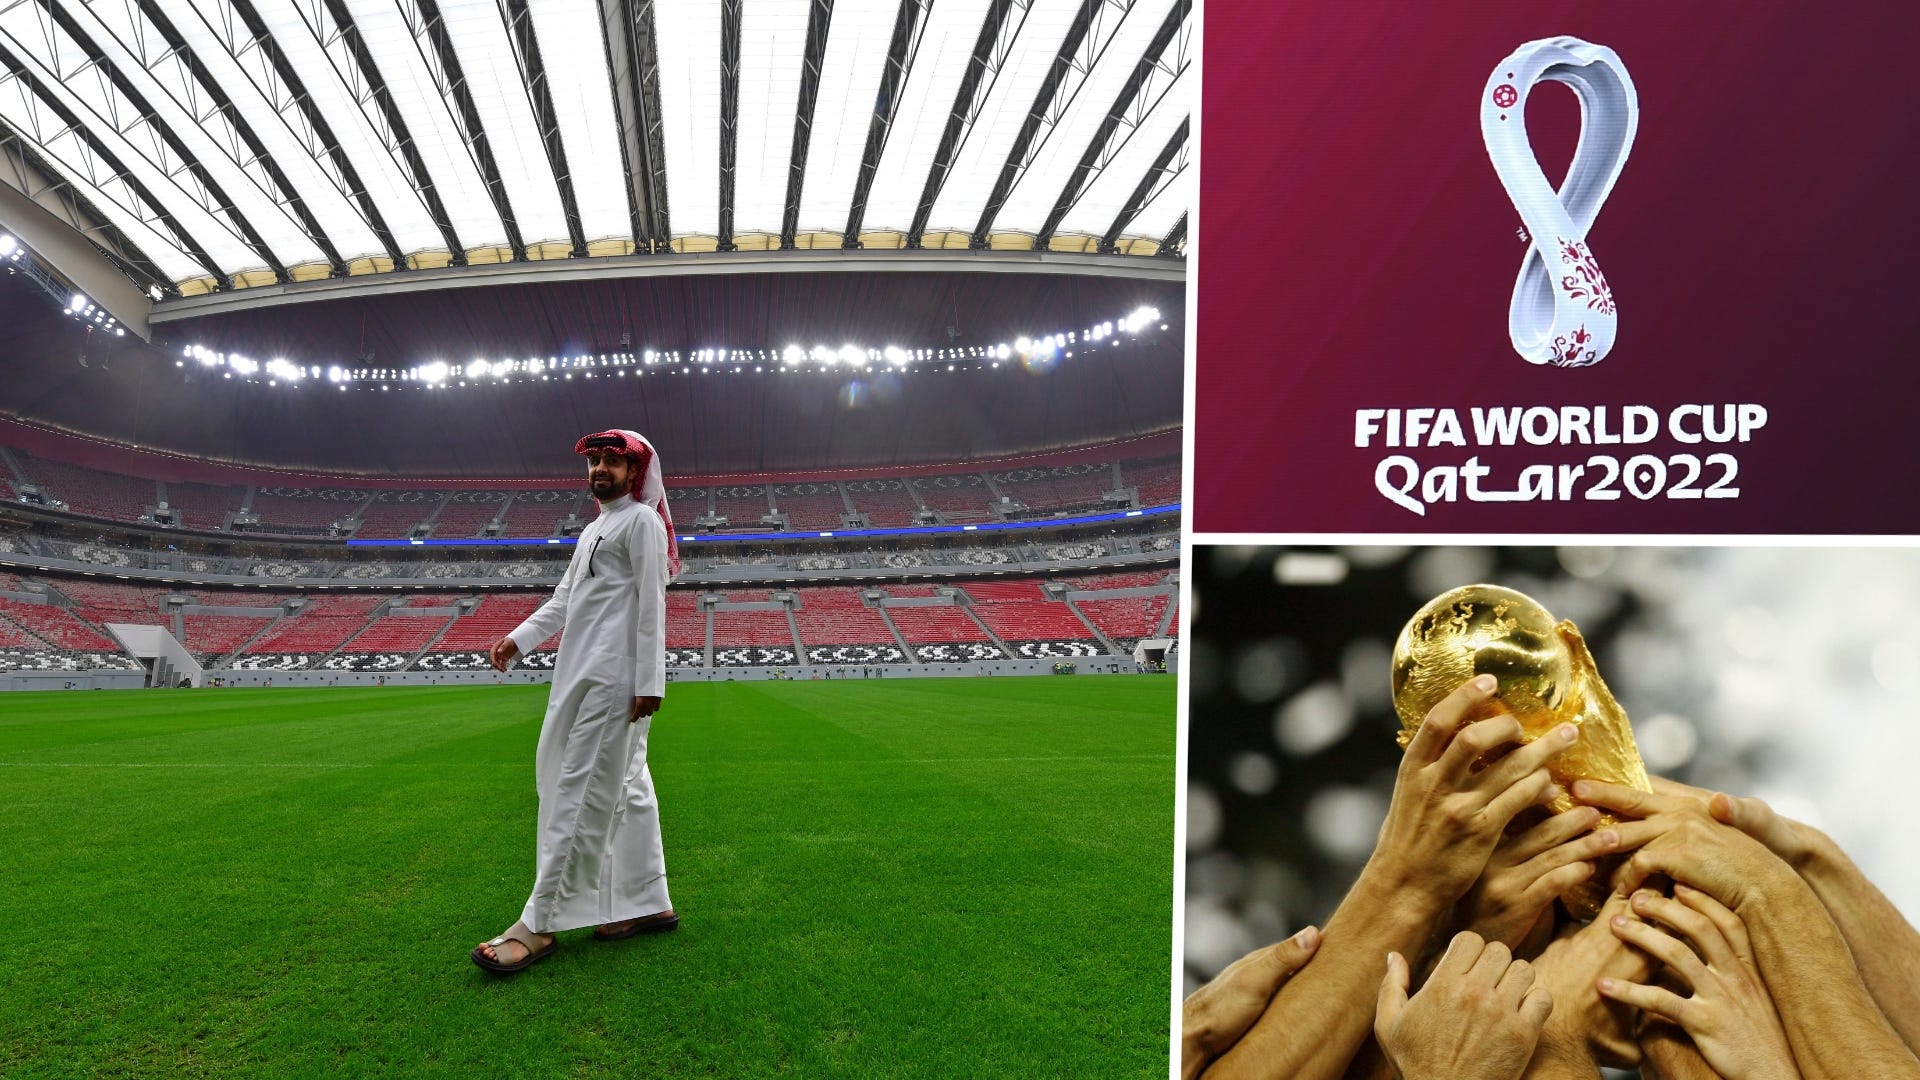 World Cup 2022 Stadiums, fixtures and tickets Goal